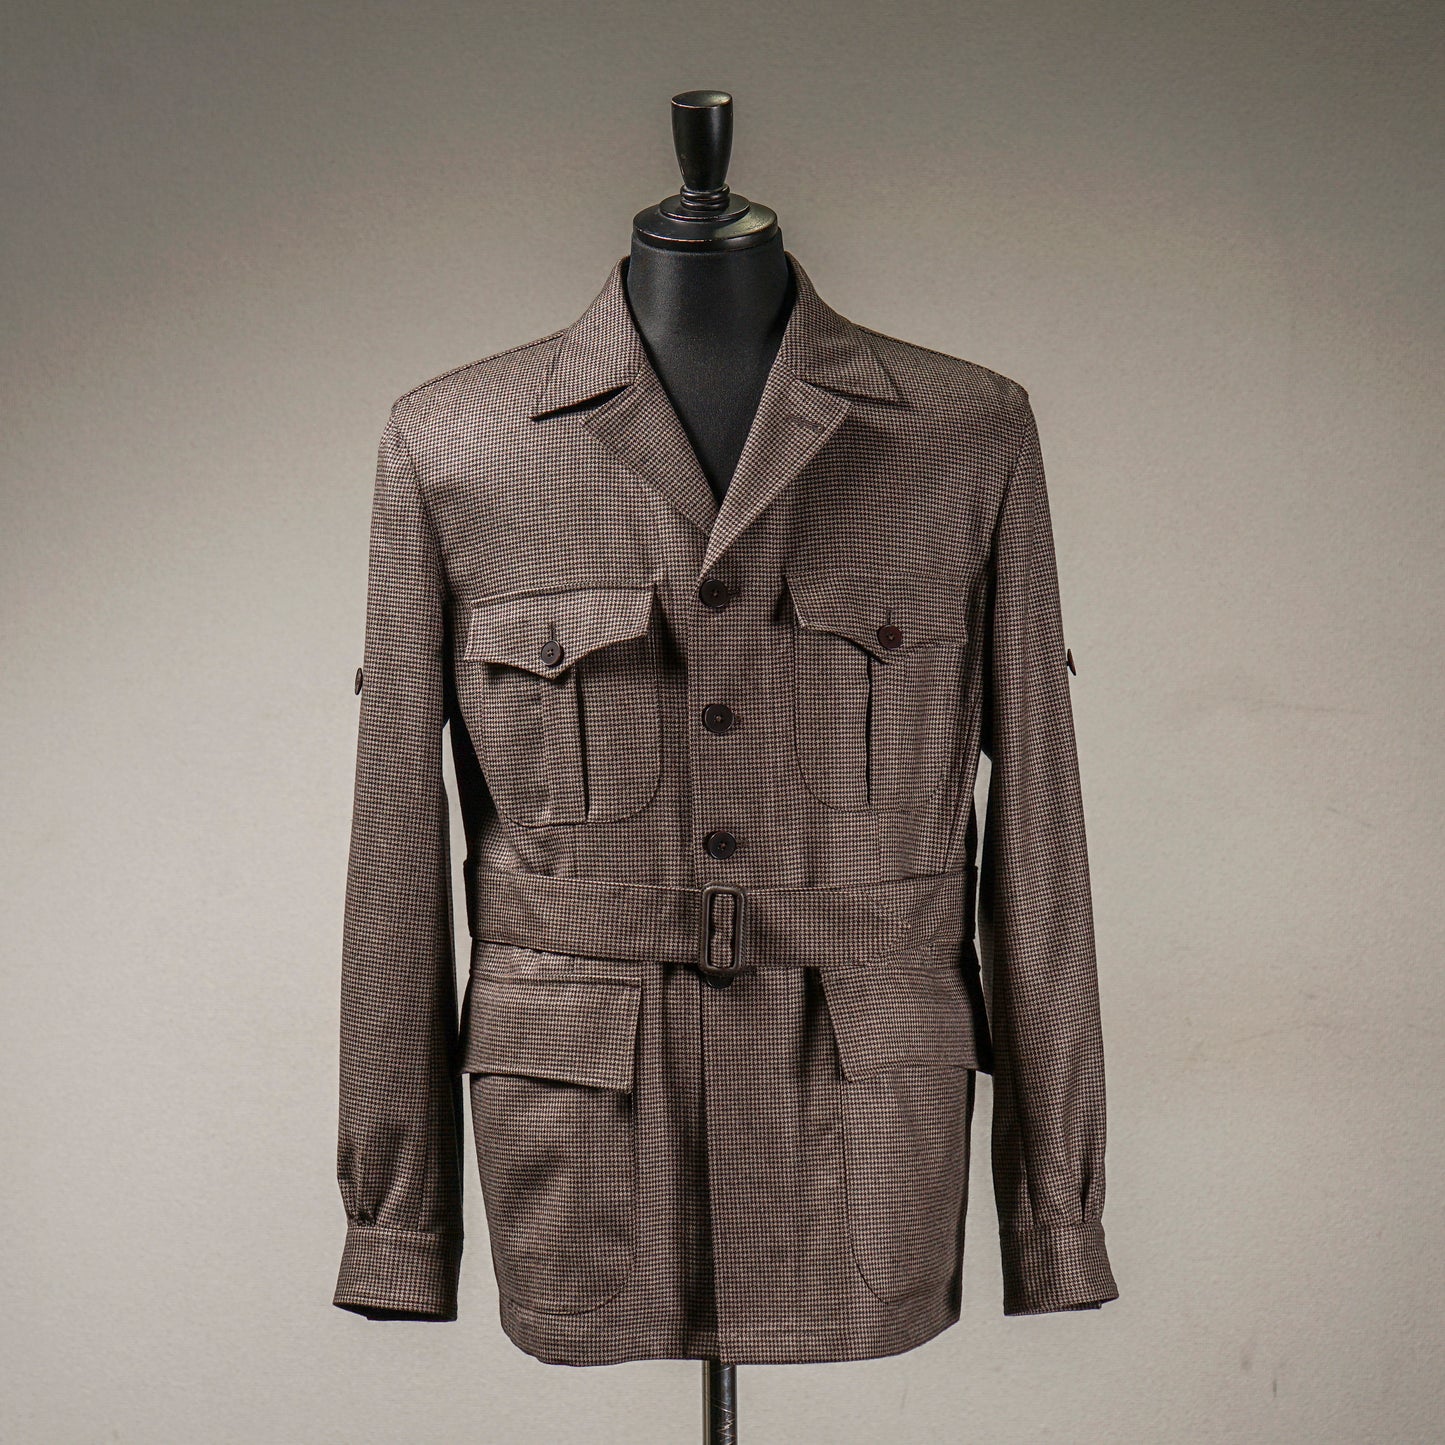 COLONIAL JACKET "JAUNTY JALOPIES" / BYGH-22-AW-11